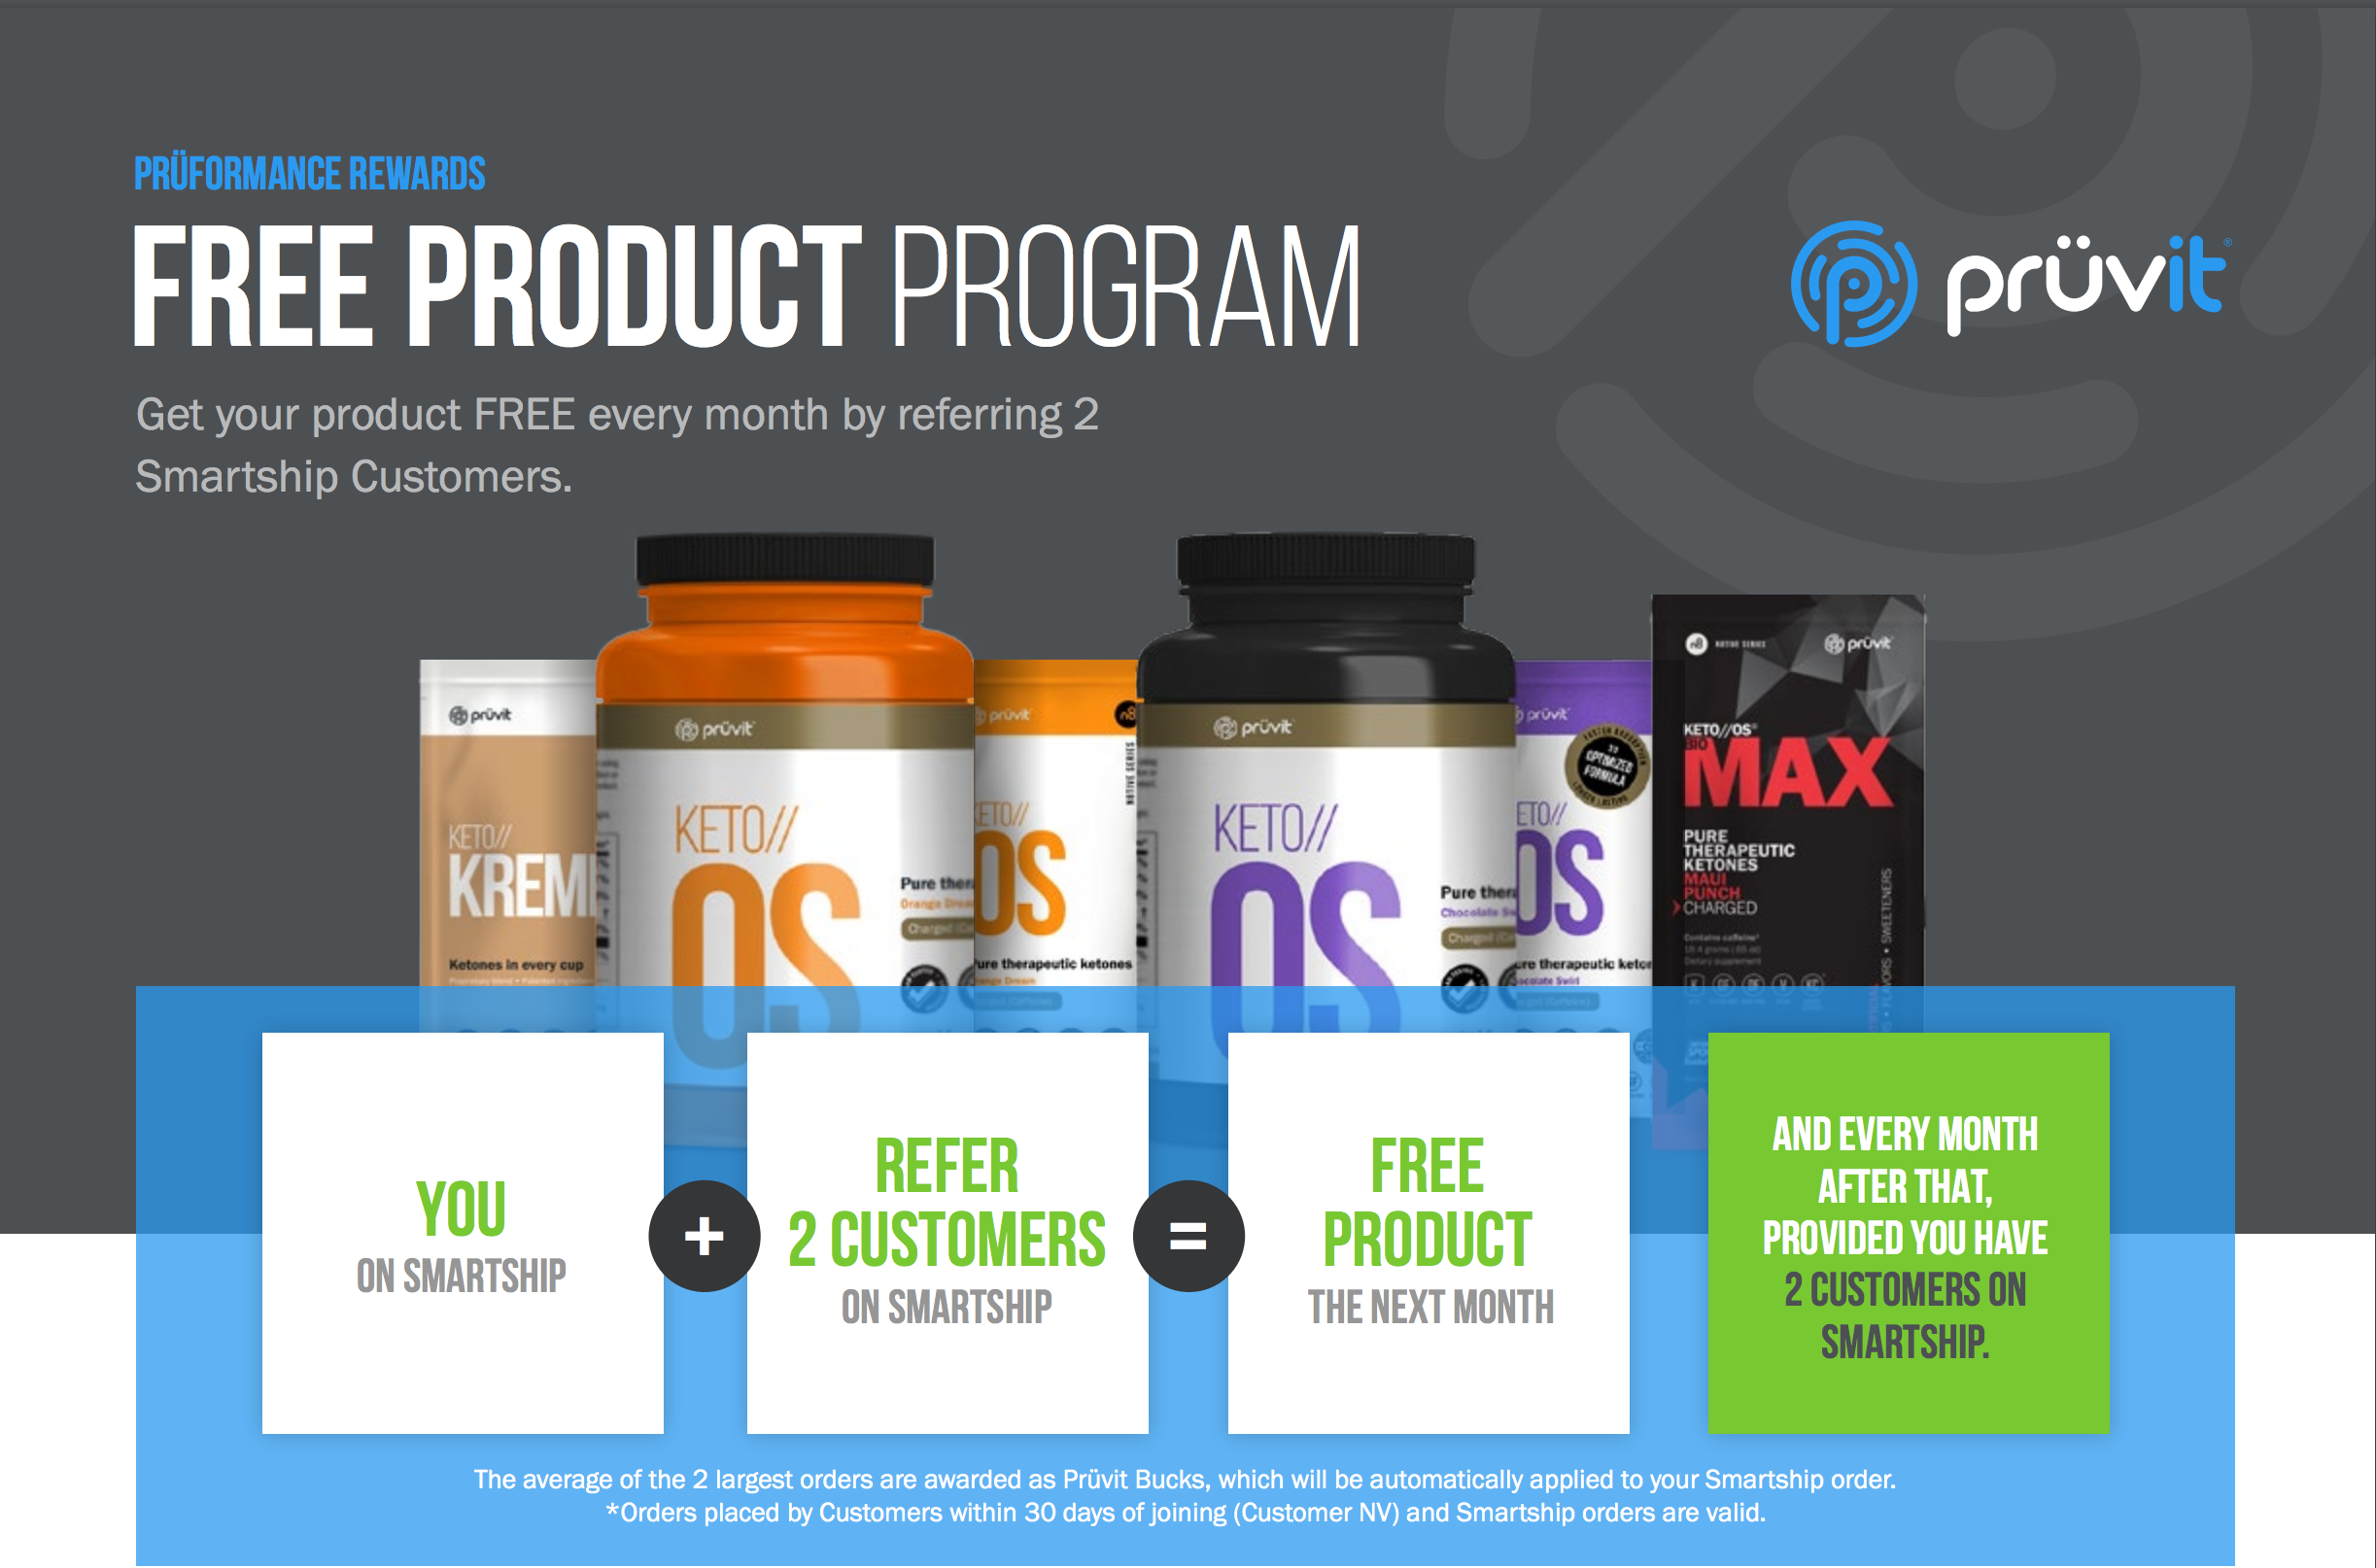 Go ahead and become a proven promoter (become a pruvit promoter) with amazing benefits